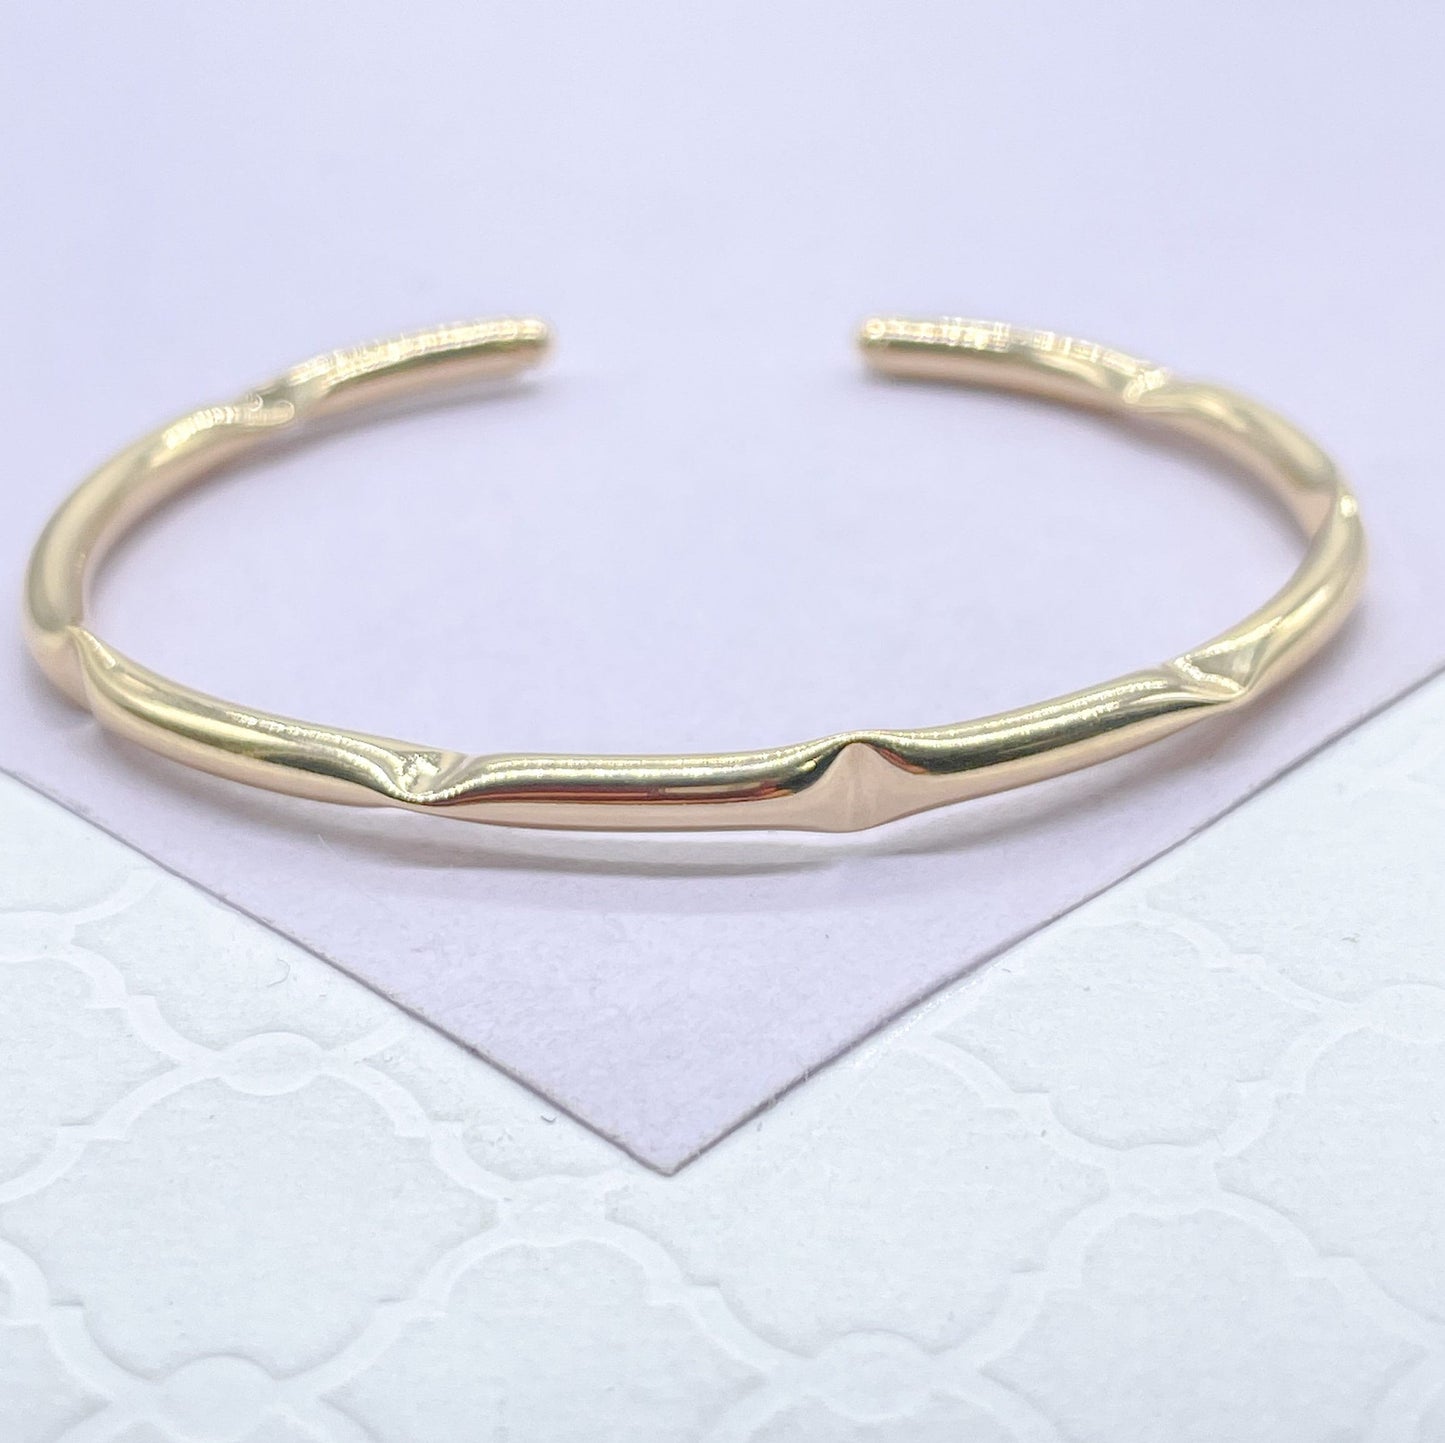 18k Gold Filled Plain Smooth Cuff Bracelet Patterned With Vertical & Horizontal Dents